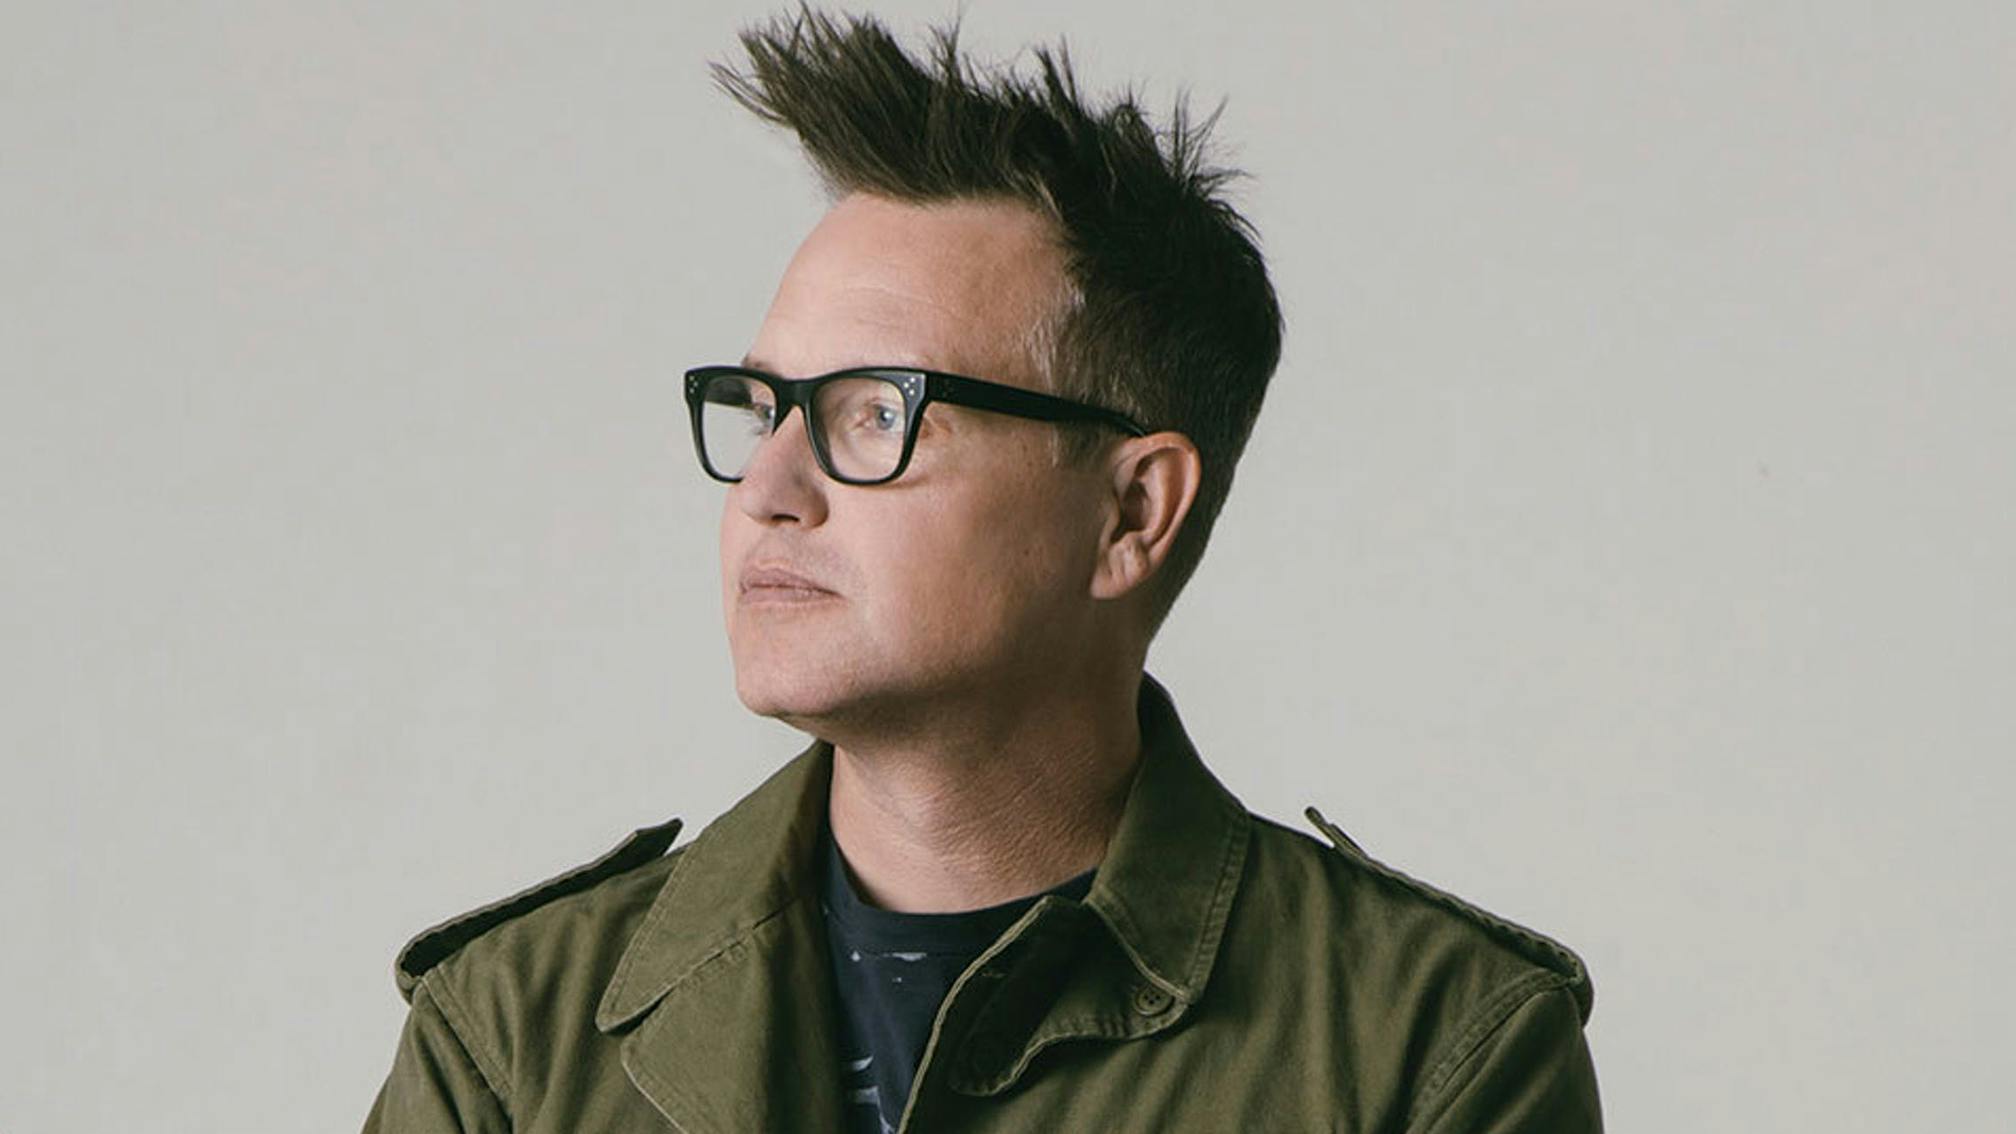 Mark Hoppus is writing a book on his life, blink-182 and cancer battle